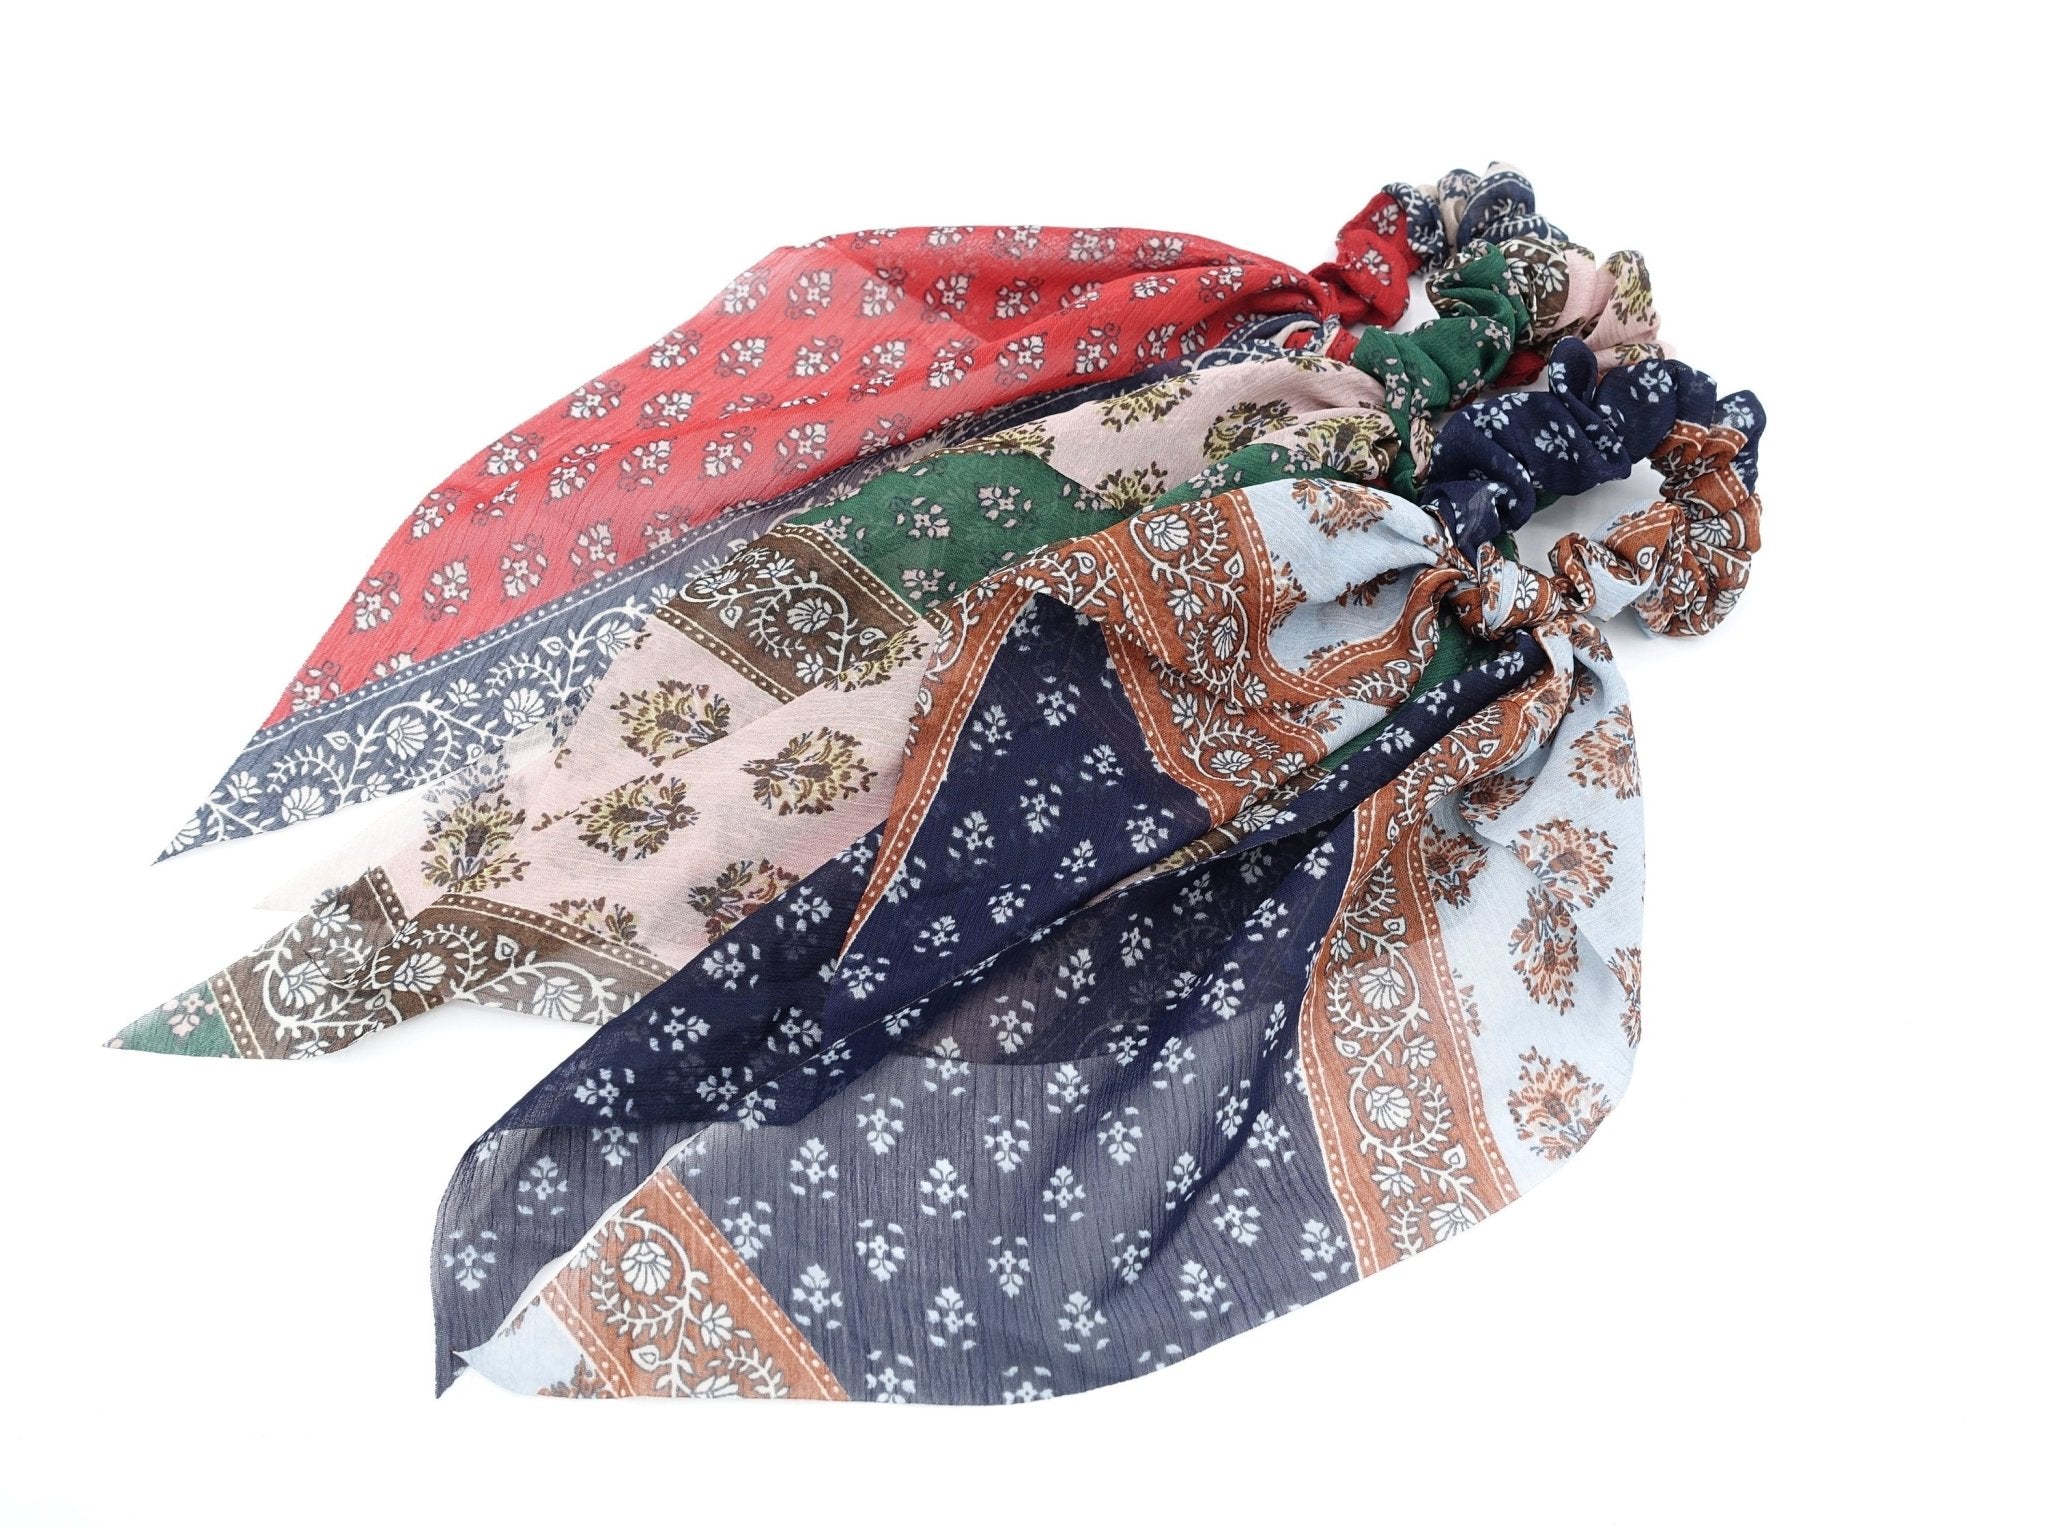 VeryShine chiffon floral paisley scrunchies tail knotted hair tie for women